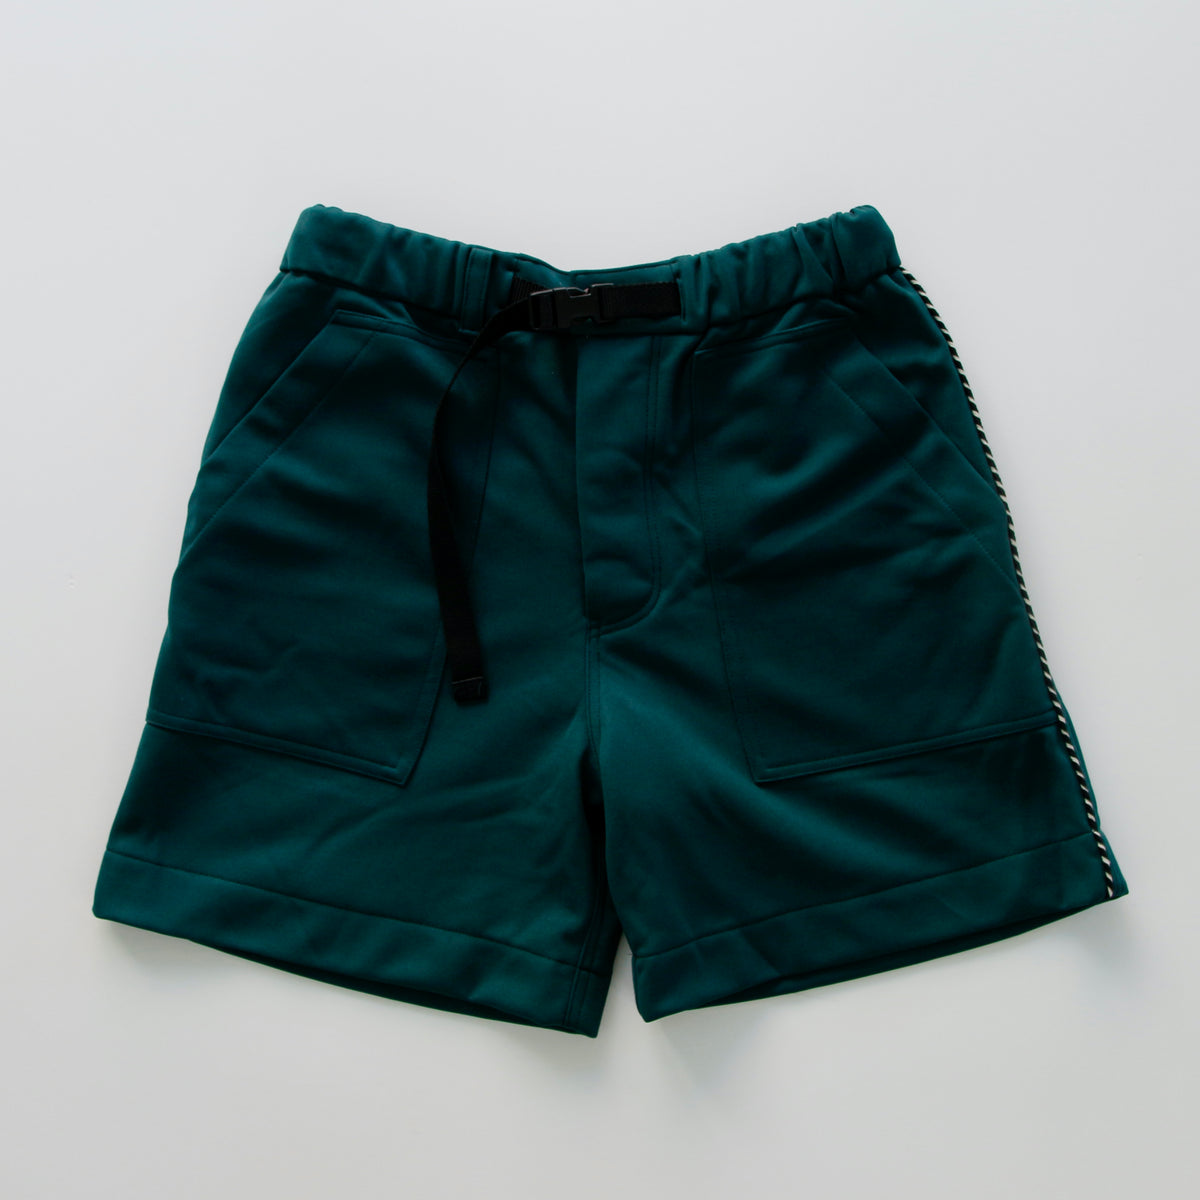 For The Homies Camp Shorts - Green